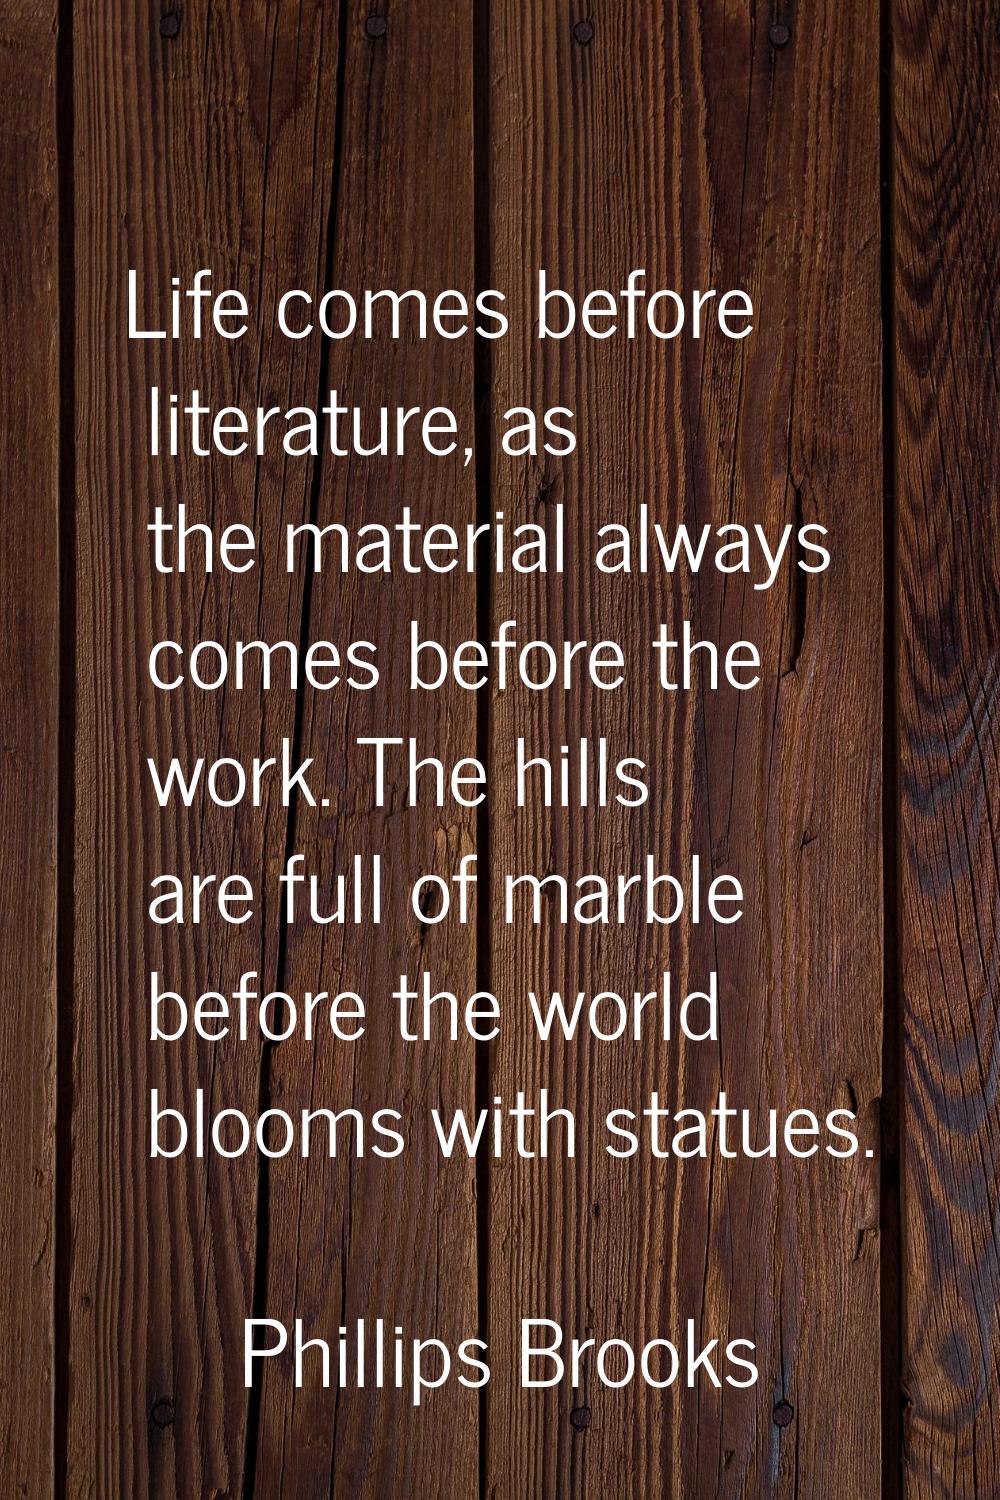 Life comes before literature, as the material always comes before the work. The hills are full of m